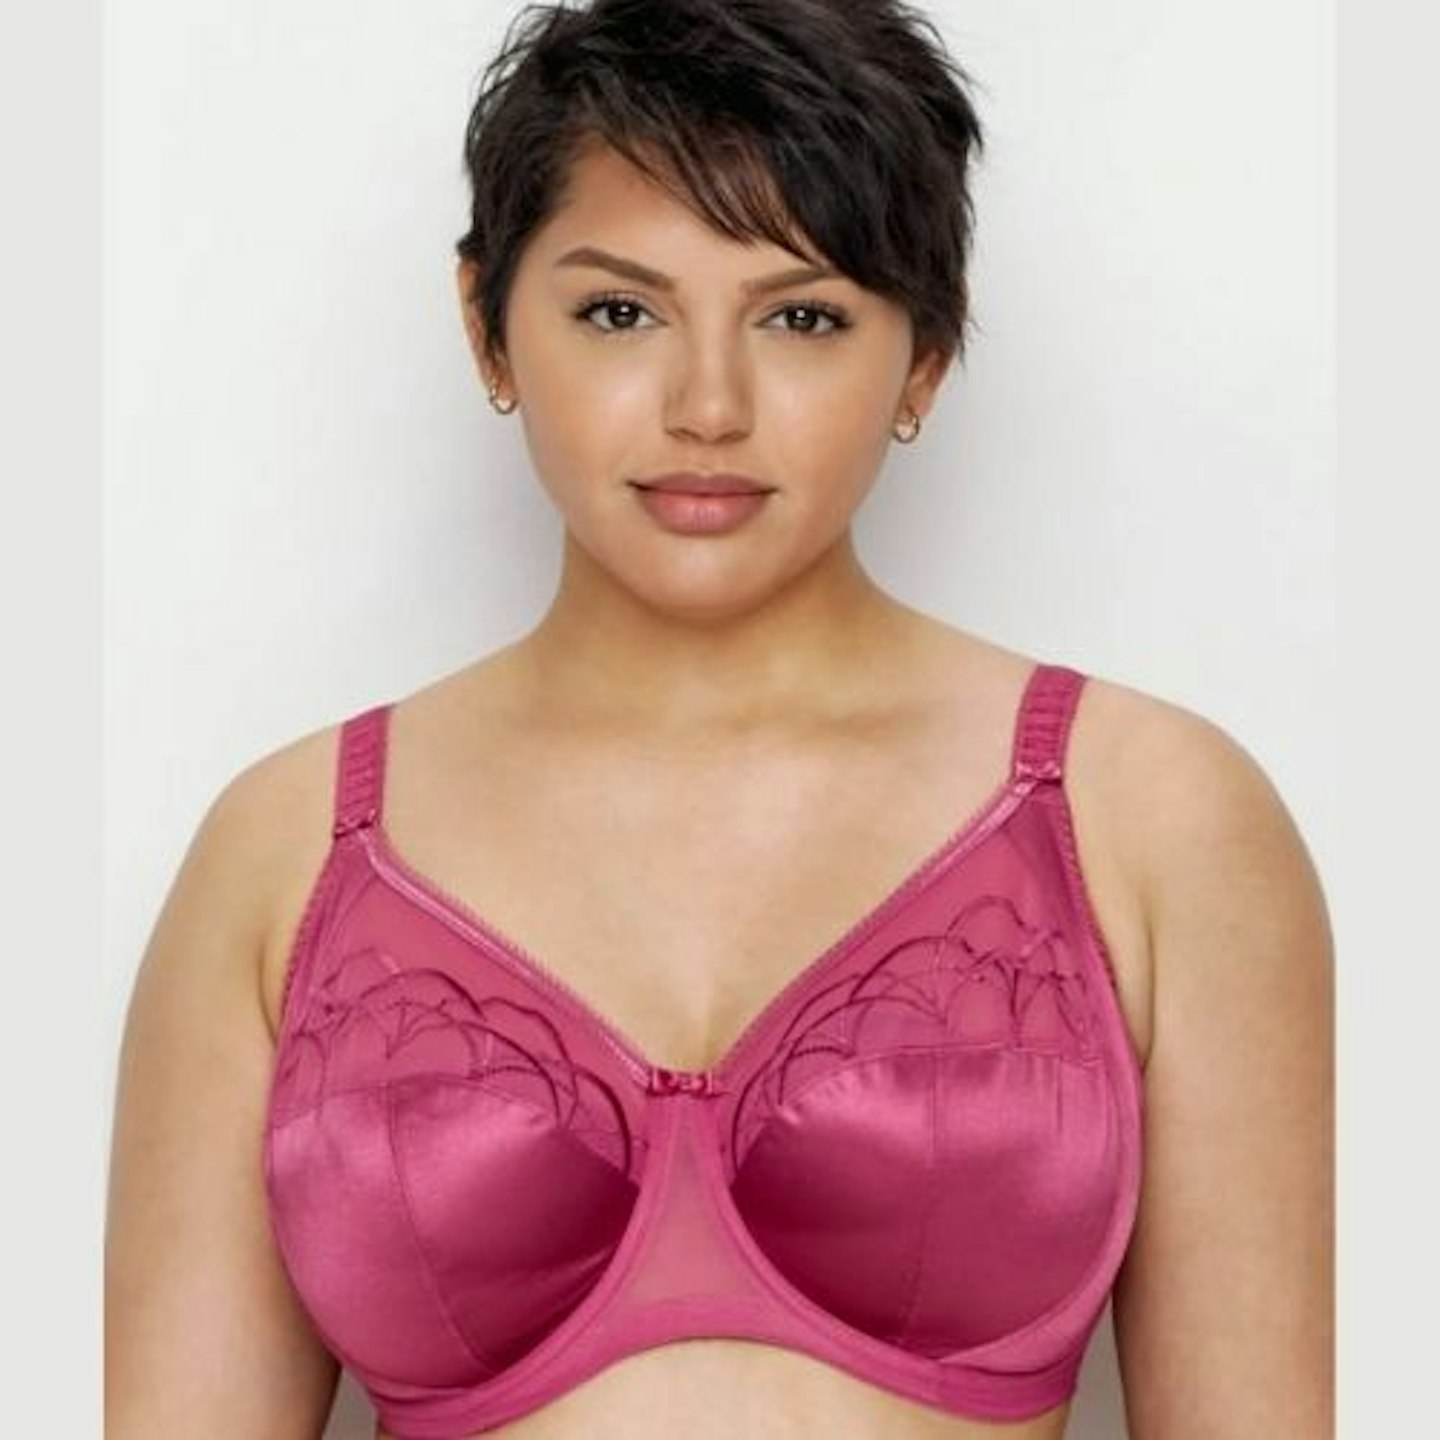 What is the Best Bra for Older Women? - We Know You've Been